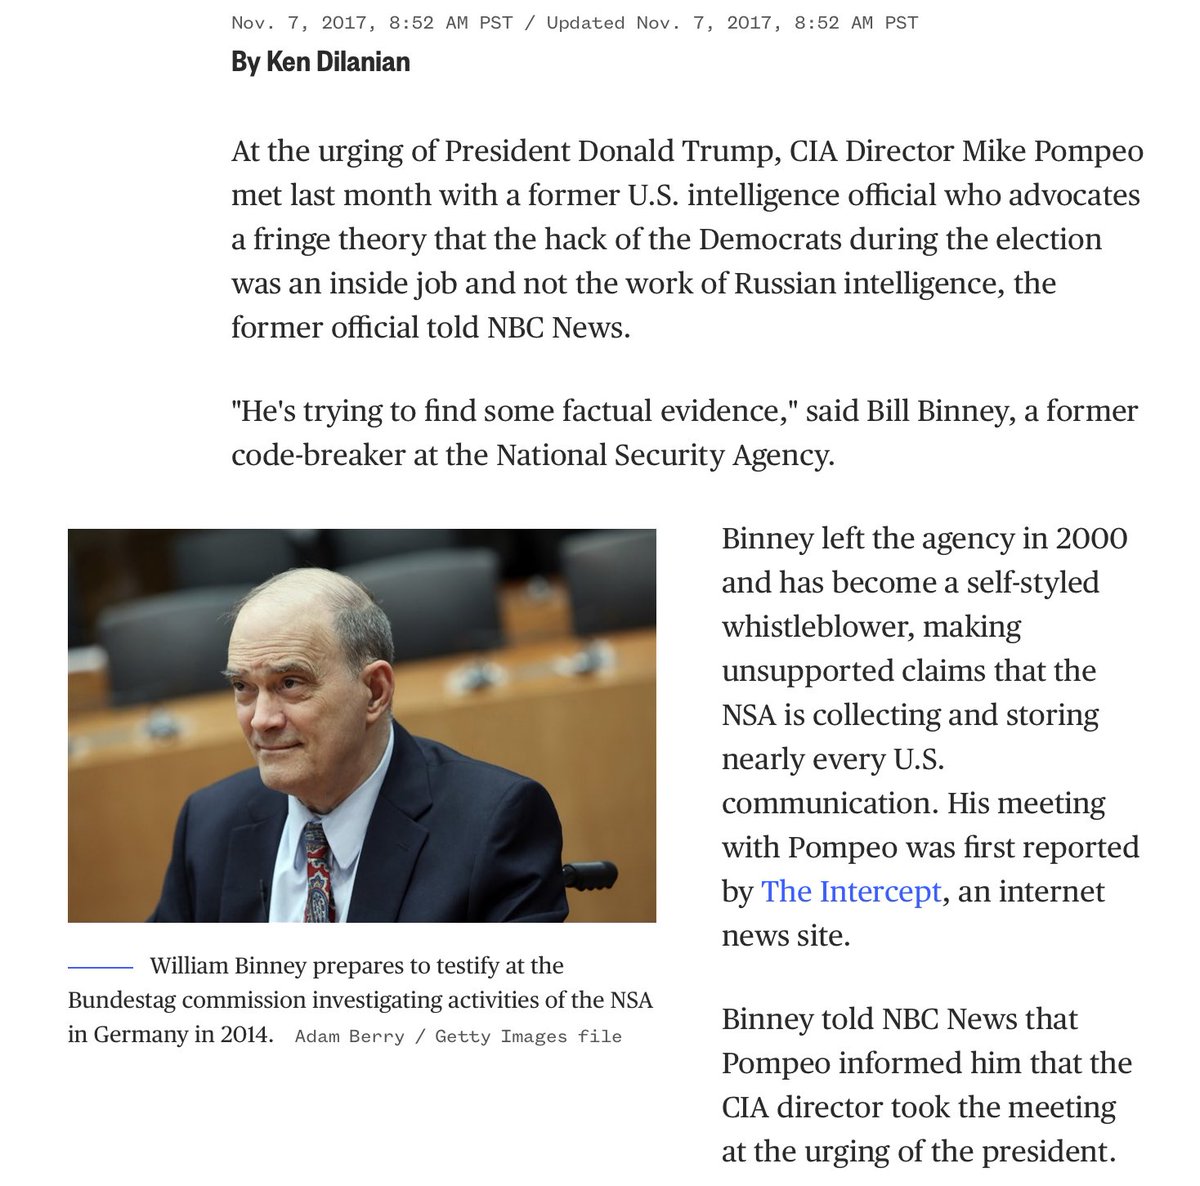 In case anyone thinks BINNEY is not a player, here he is after TRUMP urged POMPEO to meet with this traitor on... Nov 7, 2017. https://www.nbcnews.com/politics/elections/nsa-critic-bill-binney-says-trump-pushed-meeting-cia-s-n818306